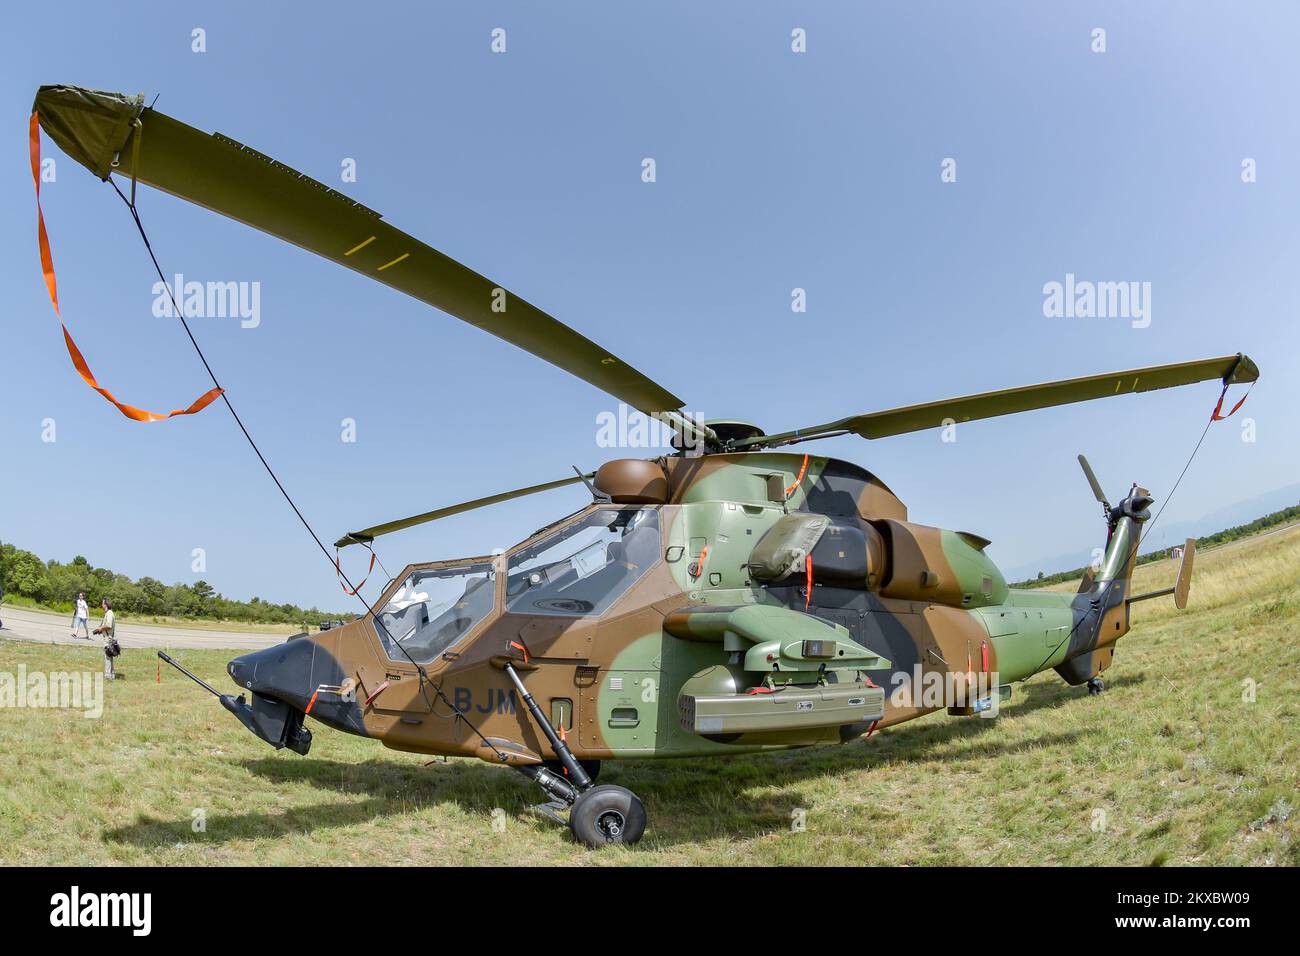 12.06.2019., Zemunik, Zadar - On the occasion of the multinational military exercise Swift Response 19, French and British helicopters arrived in military facility 'Mirko Vuksic'. Currently there are more than 500 members of the British and French Armed Forces with about 170 vehicles and 15 helicopters, as well as ten members of the Croatian Army with three vehicles. The French Air Force arrived in Zemunik with the EC-665 Tiger helicopters. Photo: Dino Stanin/PIXSELL Stock Photo